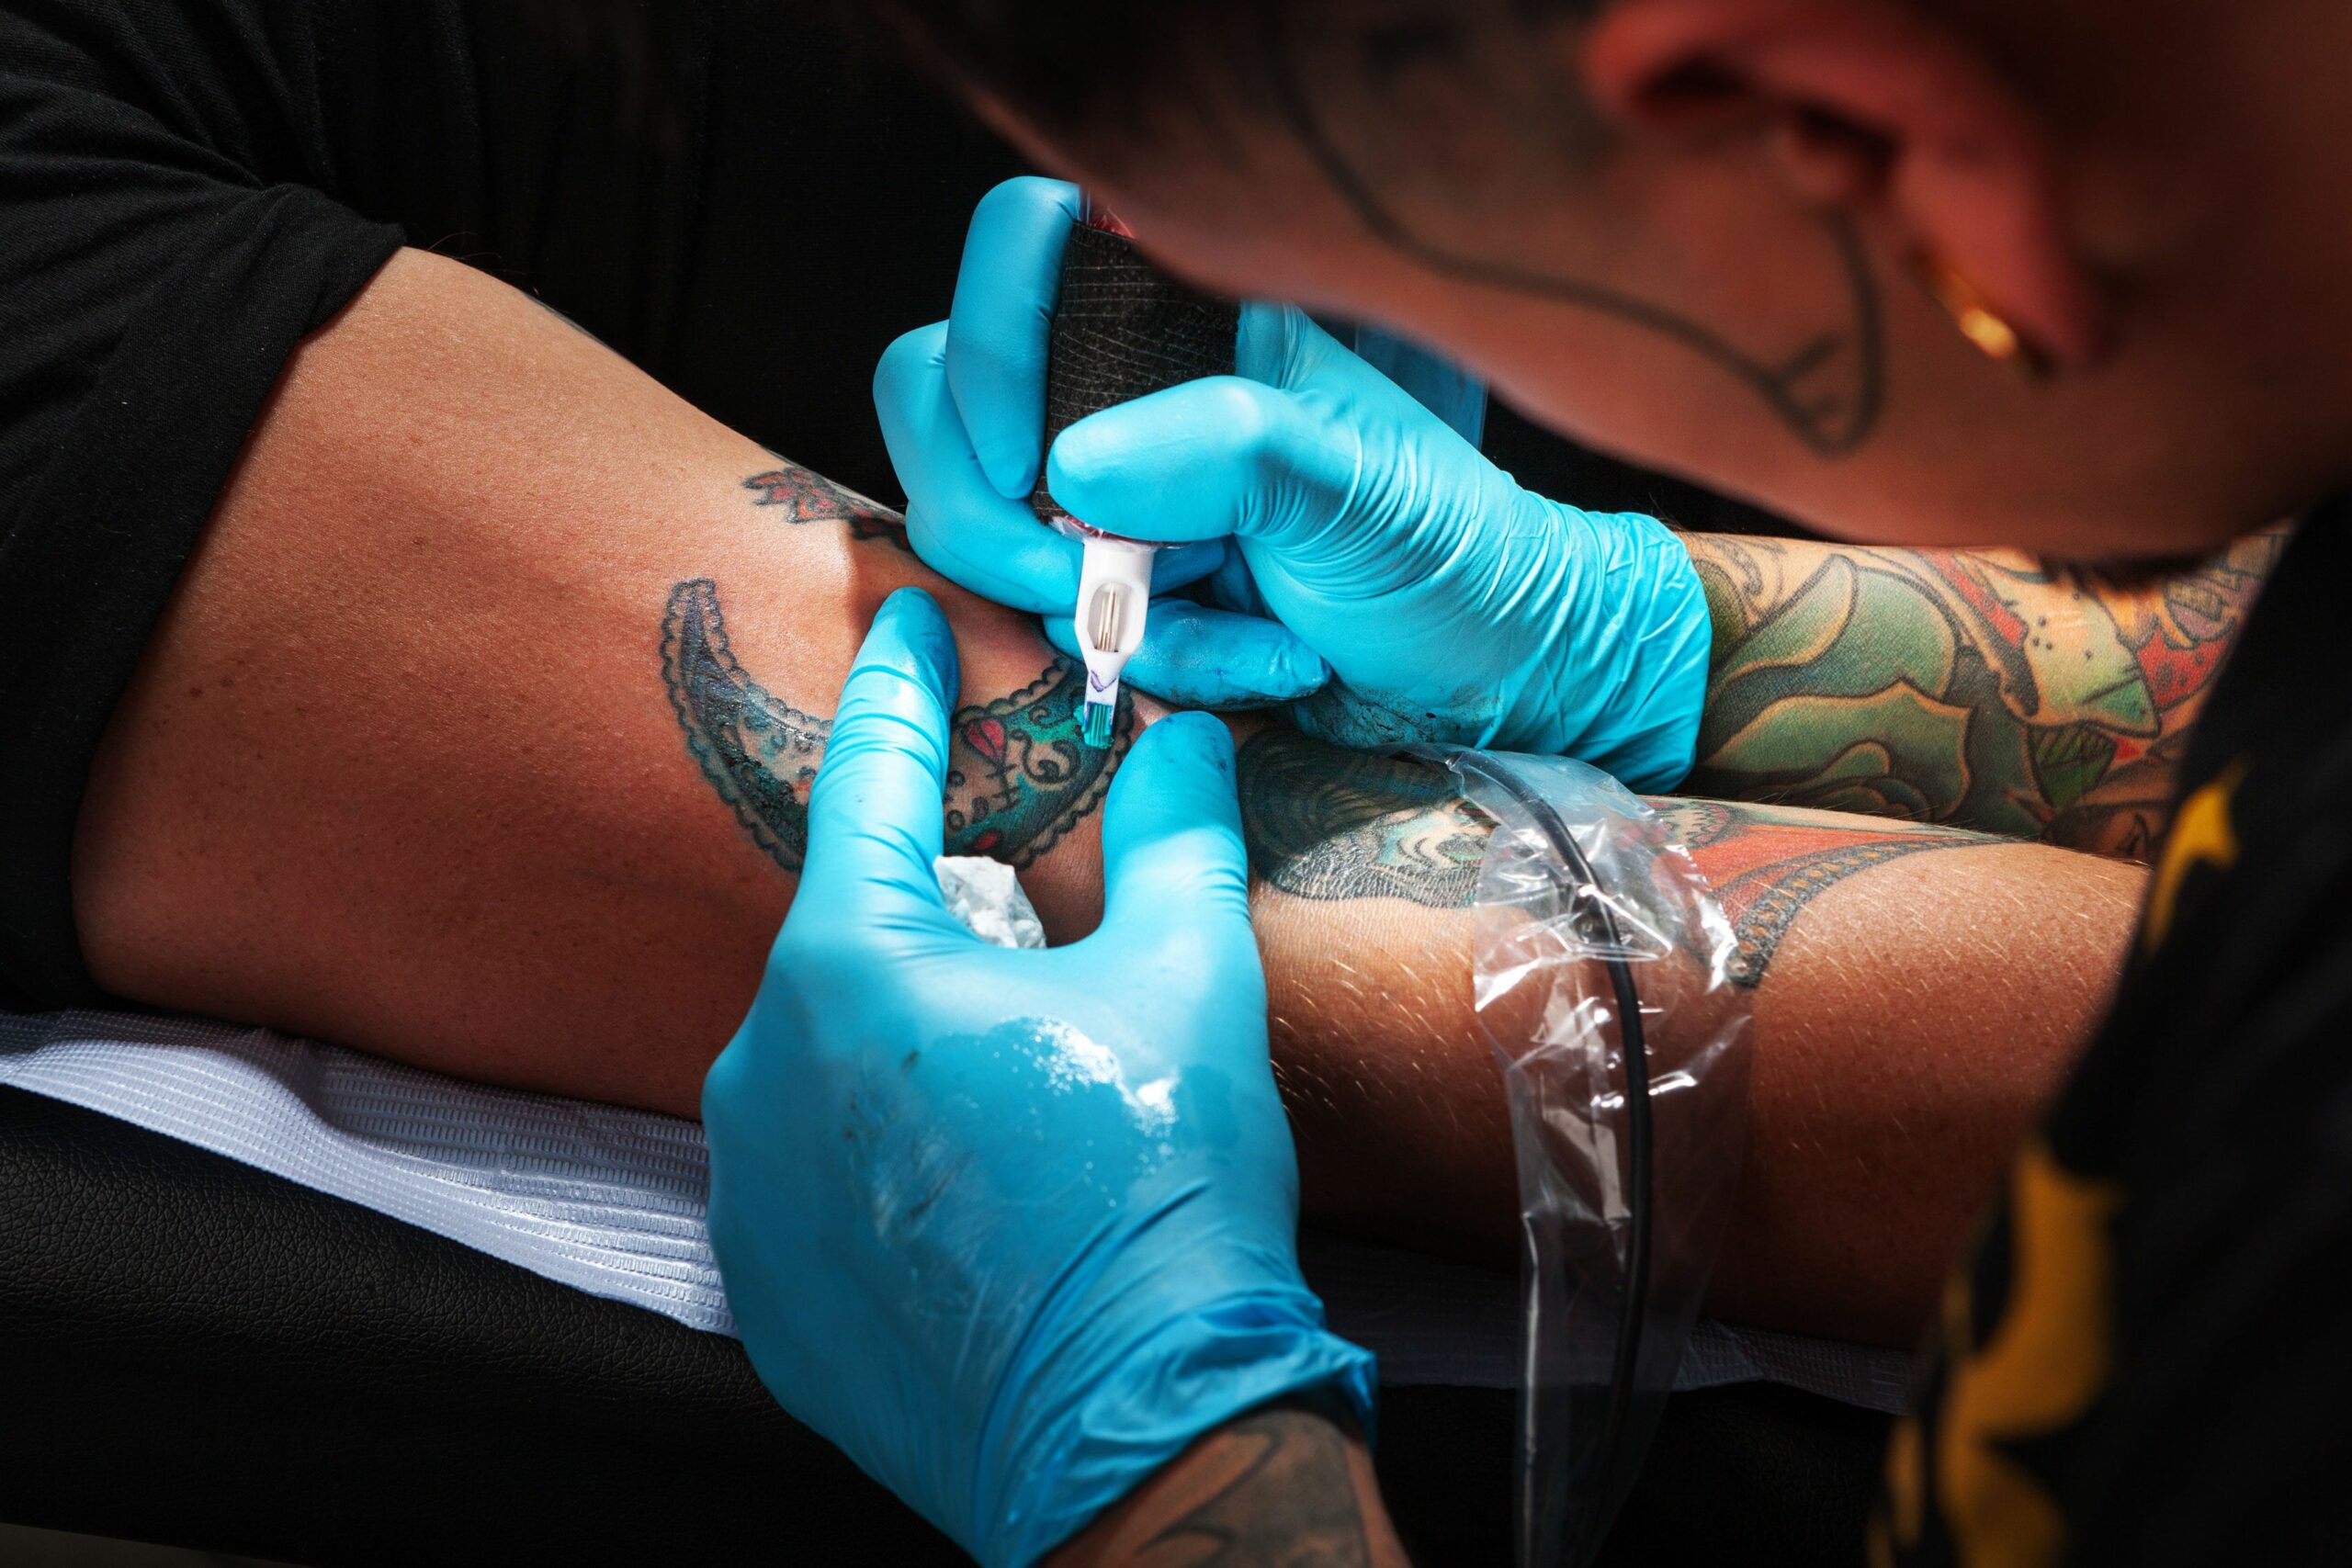 Is It Time to Get a Tattoo Touch-Up - 7 Signs to Watch For